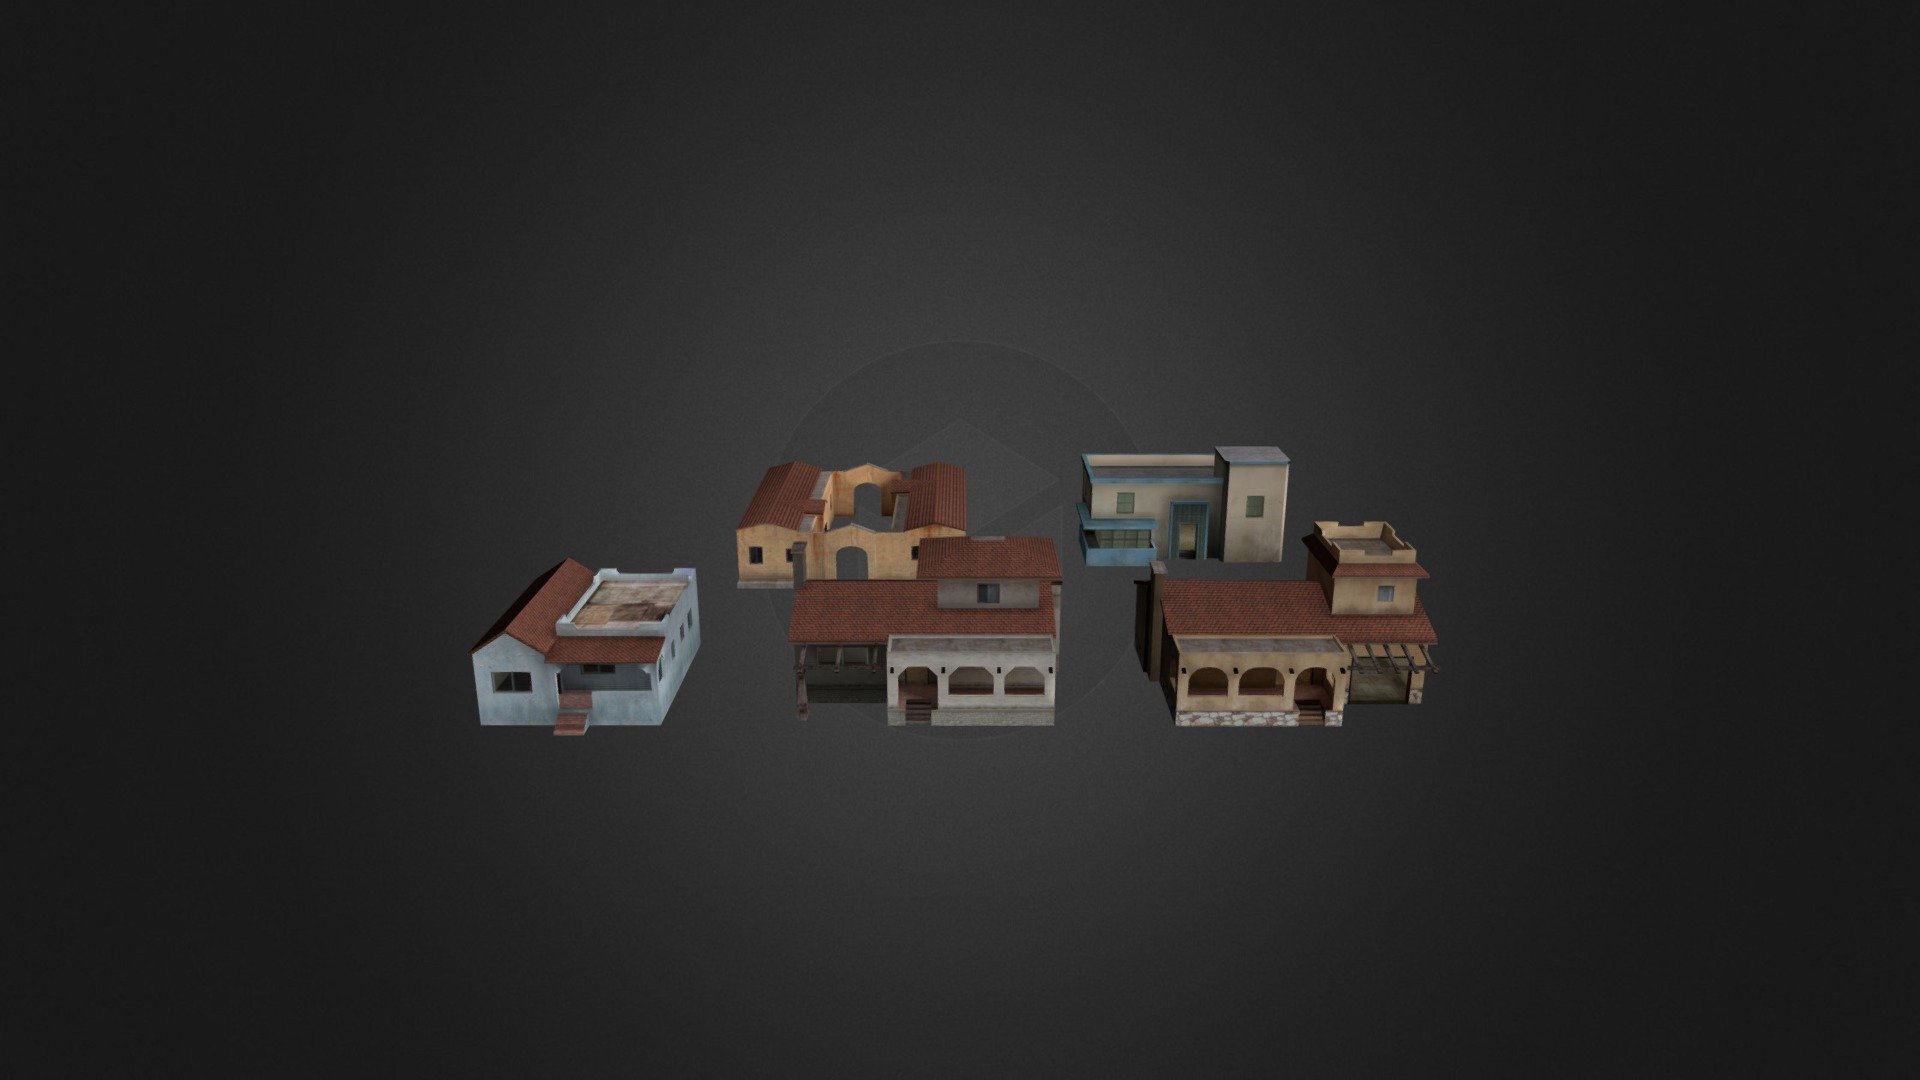 🛒 The model is available for purchase here: https://lisiumods.com/b/marina-and-glenpark-3d-houses-pack - 3D Houses Pack - GTA SAN ANDREAS - 3D model by Lisiu mods (@lisiu) 3d model